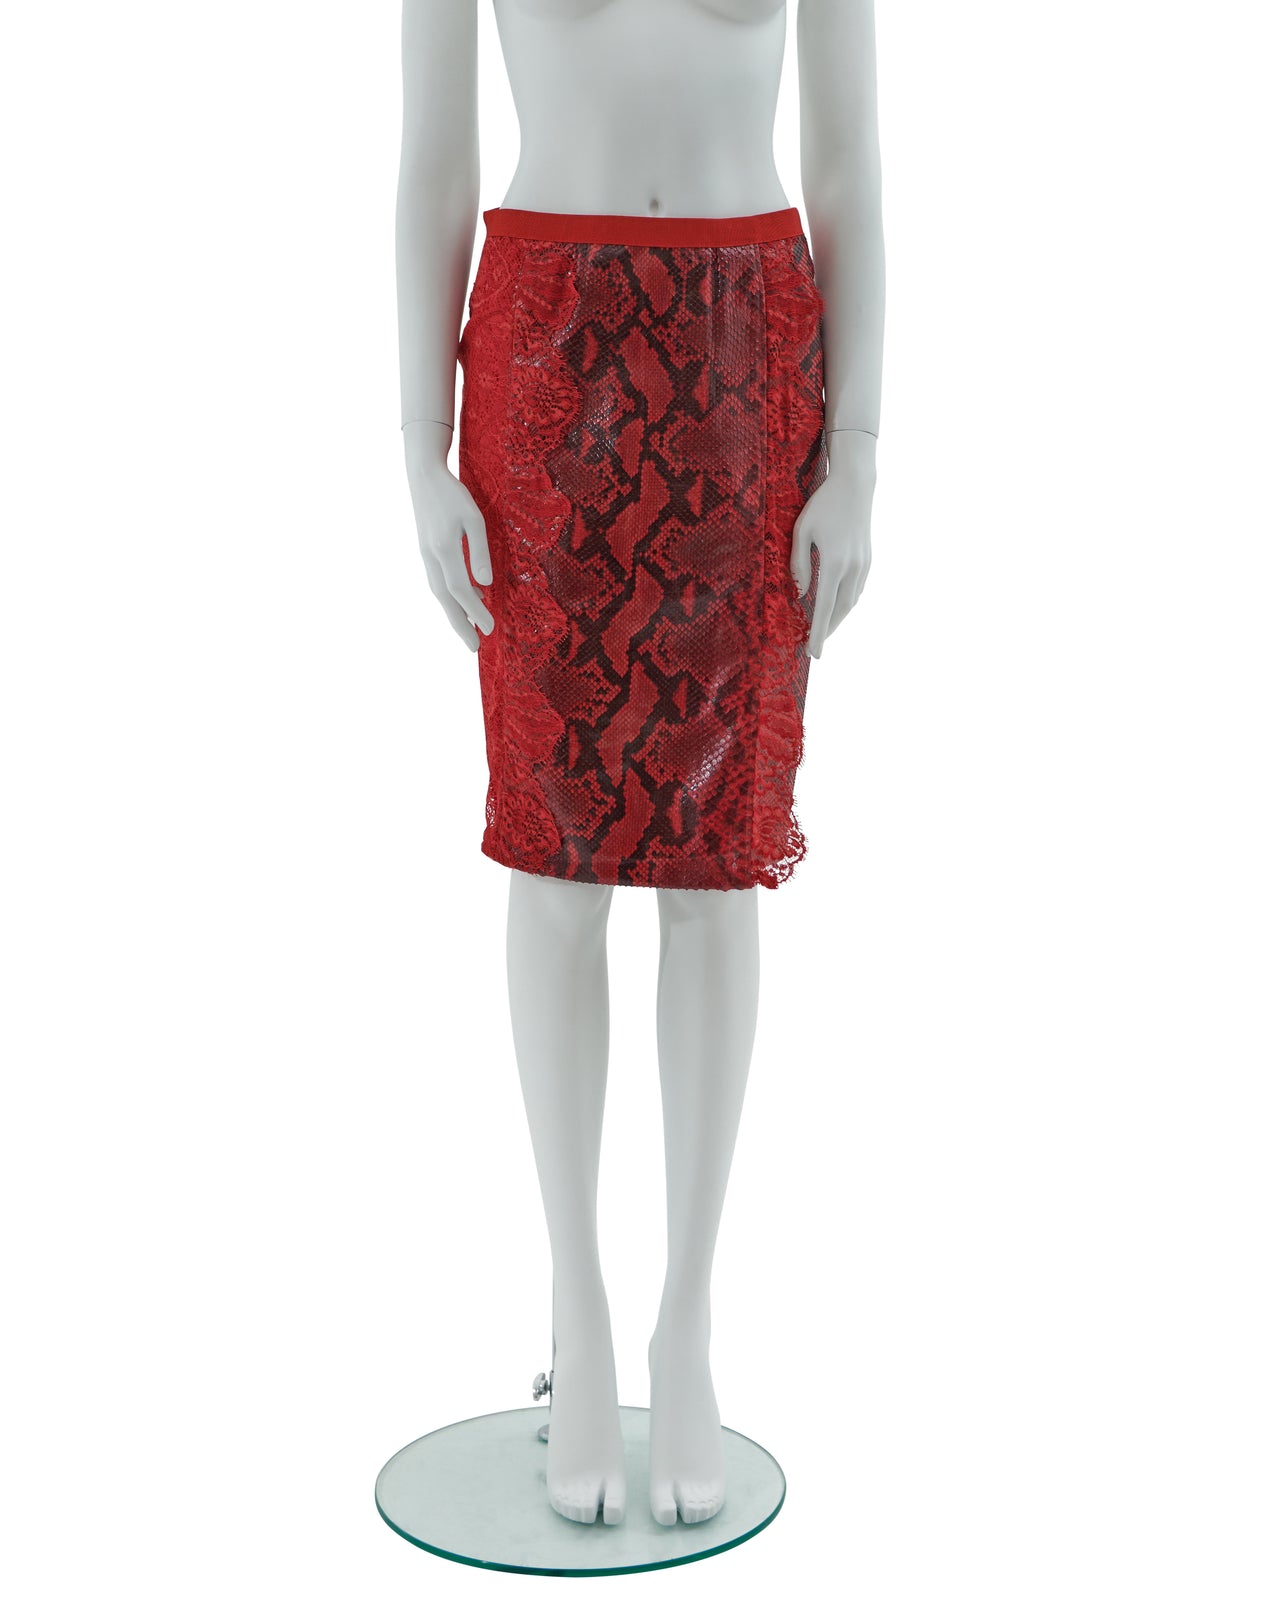 Dolce & Gabbana S/S 2005 Red phyton and lace skirt